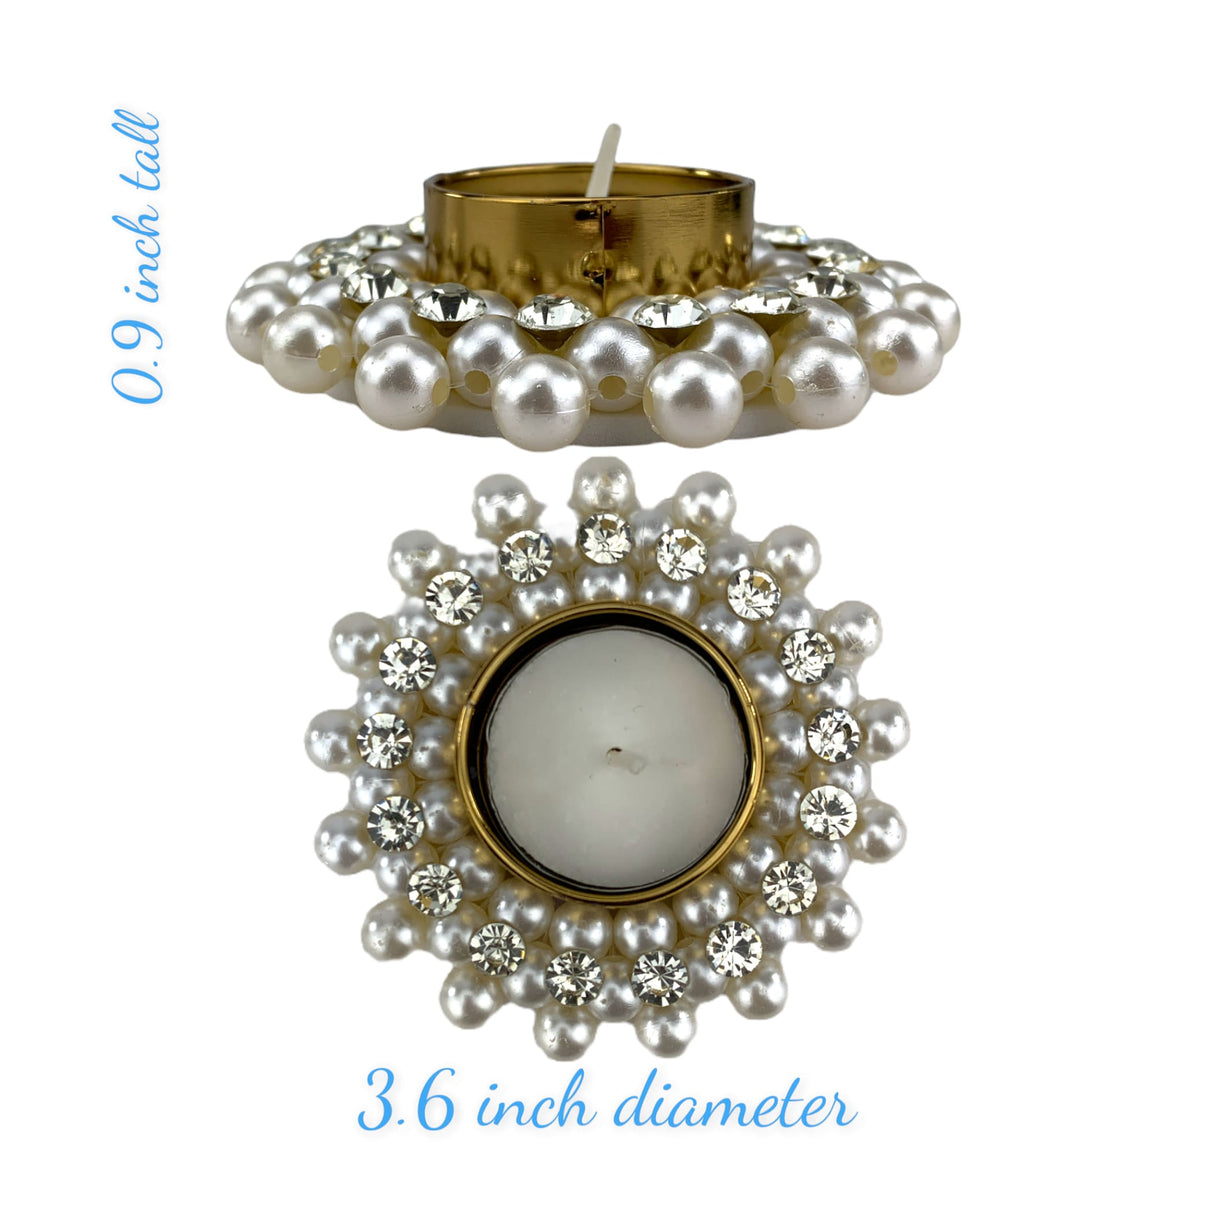 Candle holder pearl moti t - light 2 pieces stand tealight